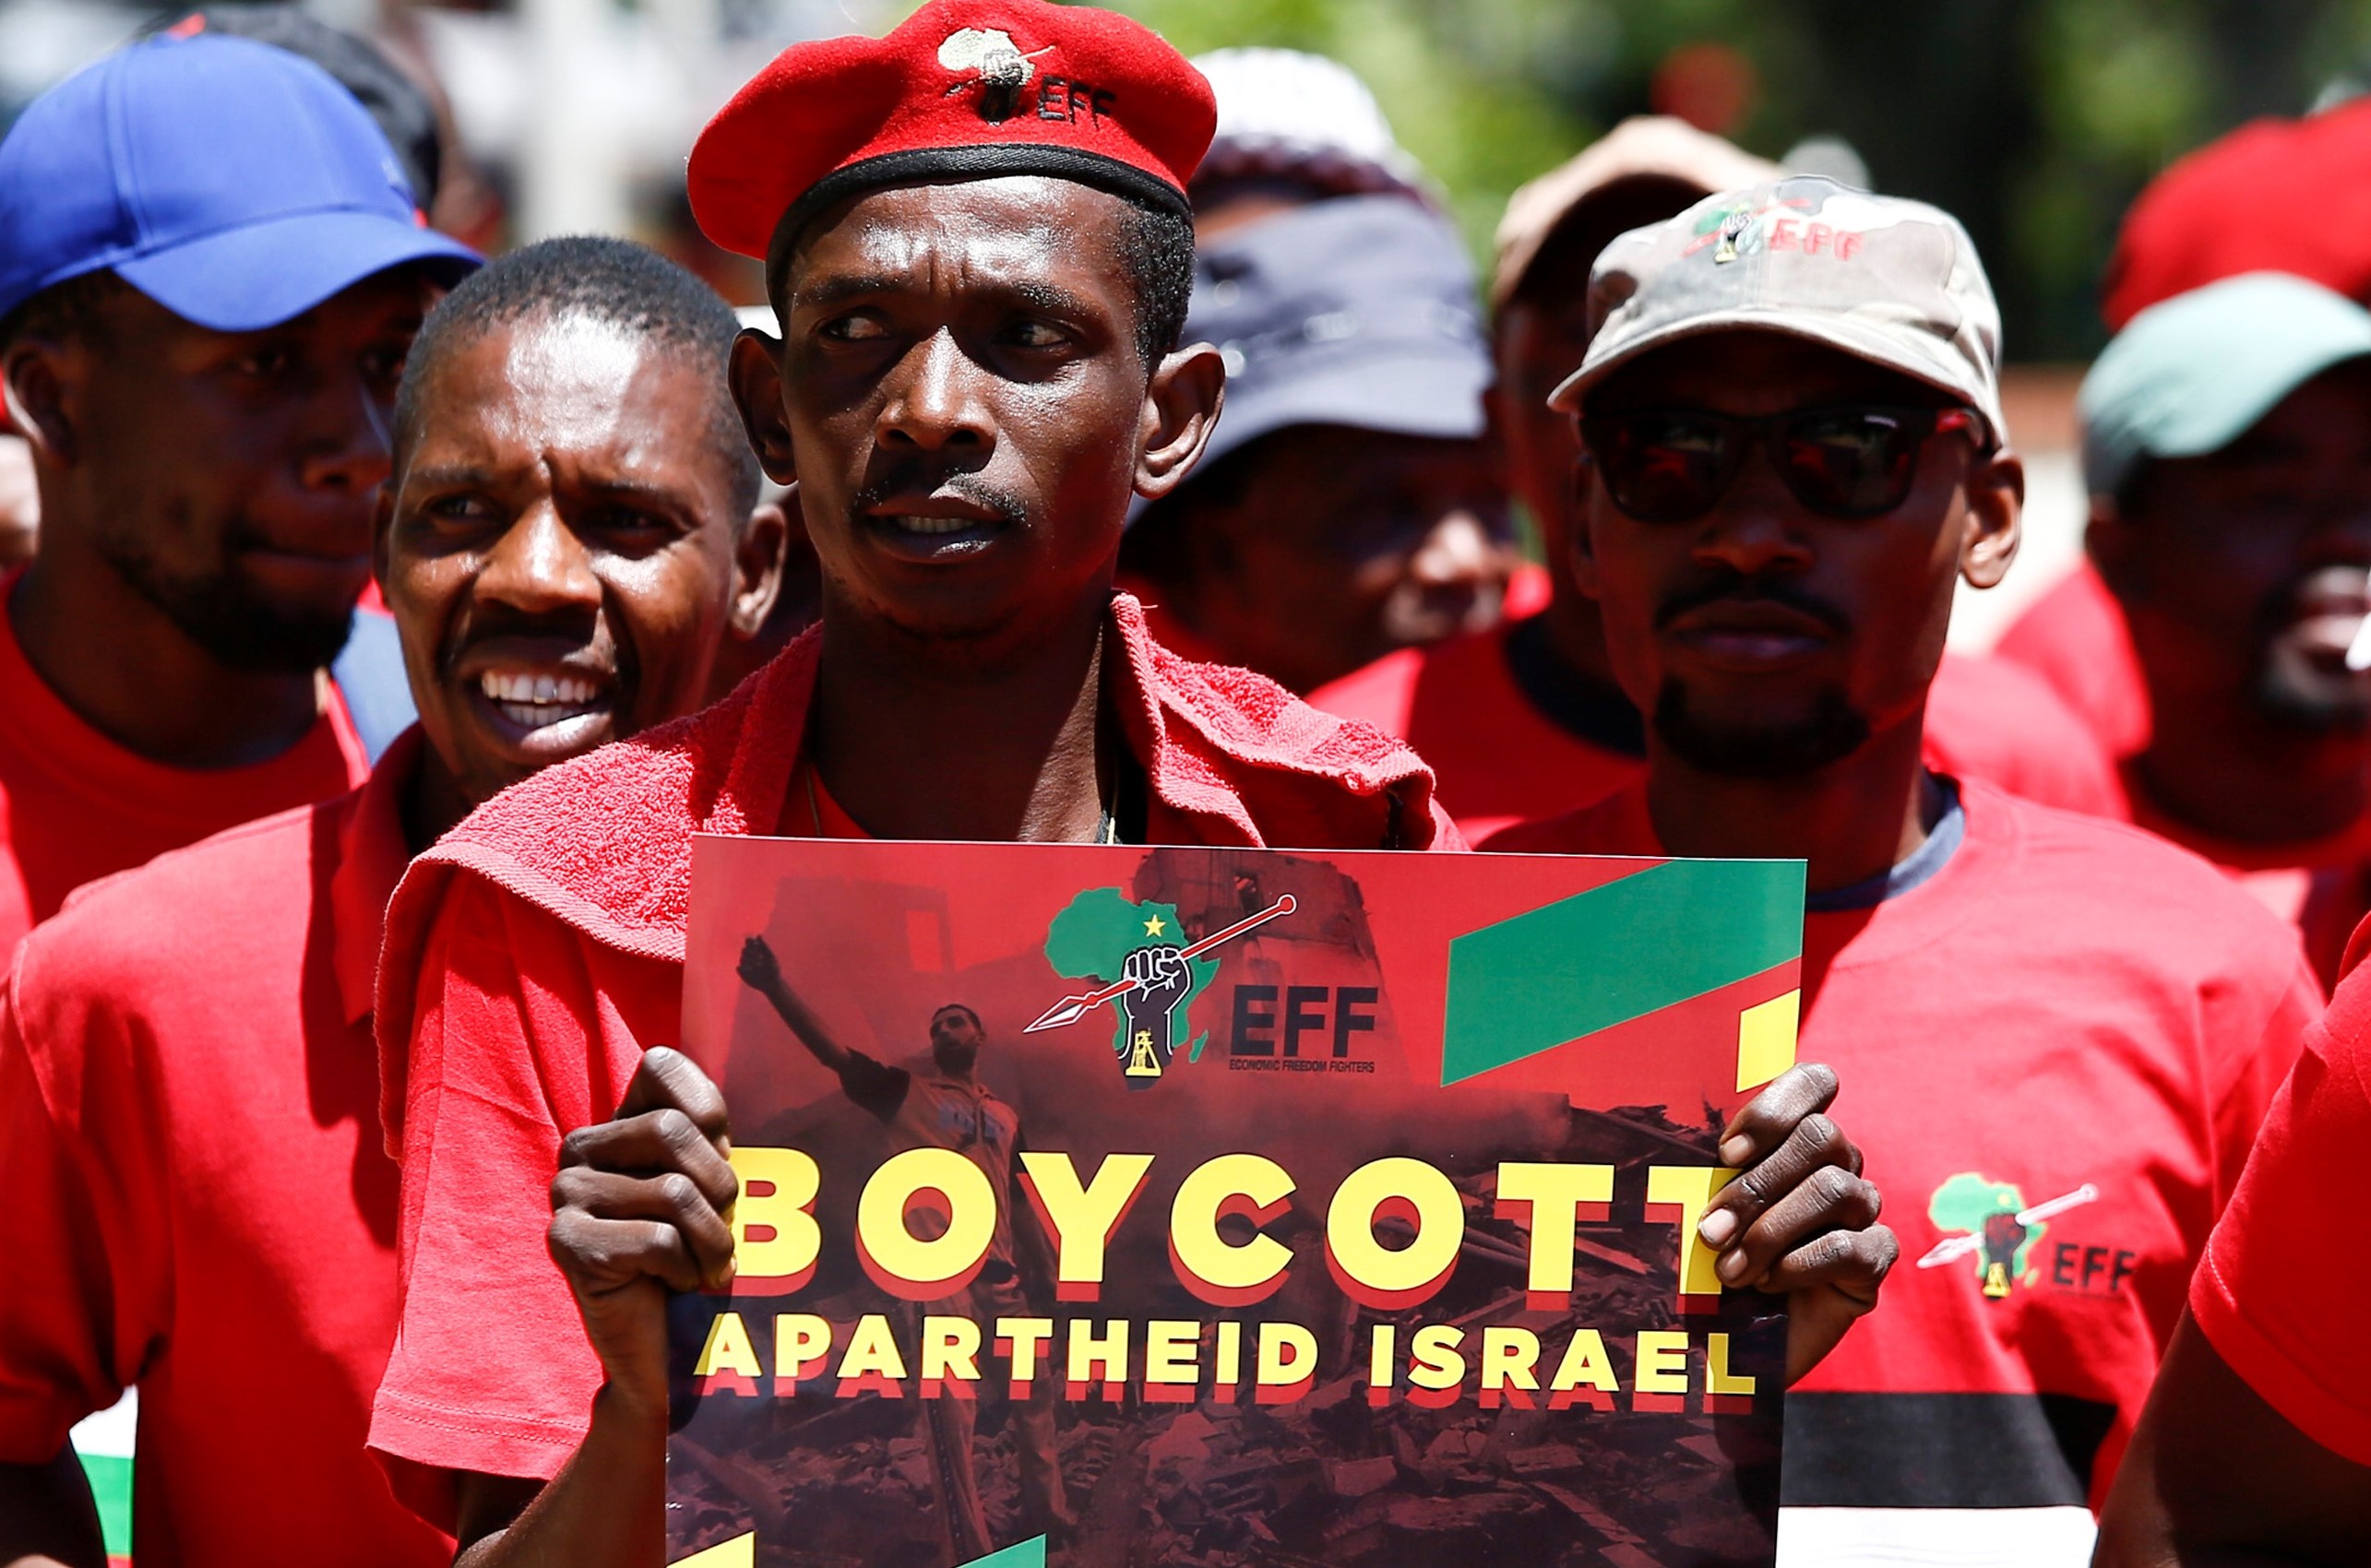  A man holds a sign as South African opposition Party Economic Freedom Fighters (EFF) members demonstrate to express their solidarity with the Palestinians on 2 November, 2017 (AFP)